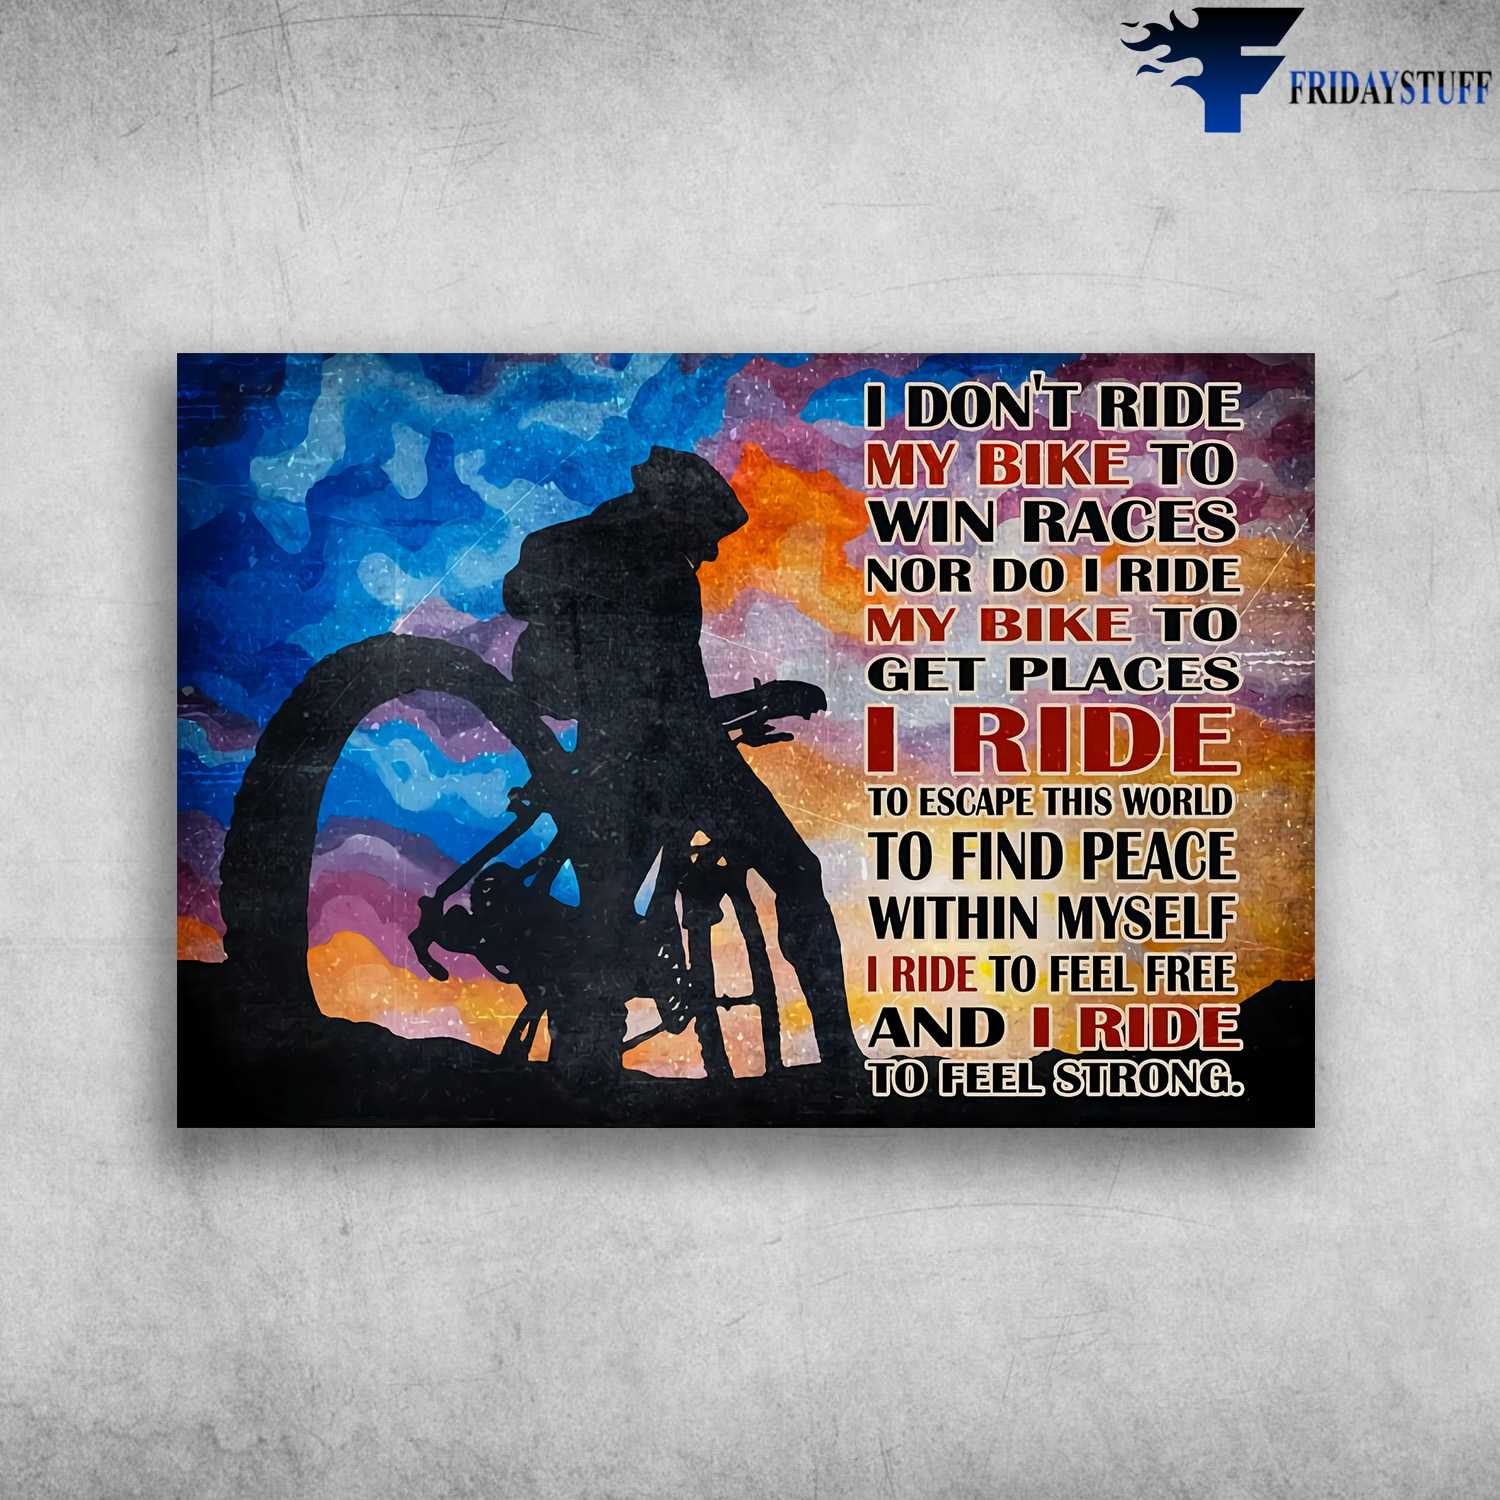 Cycling Man, Biker Lover - I Don't Ride My Bike To Win Races, Nor Do I Ride My Bike To Get Places, I Ride To Escape This World, To Find Peace Within My Self, I Ride To Feel Free, And I Ride To Feel Strong